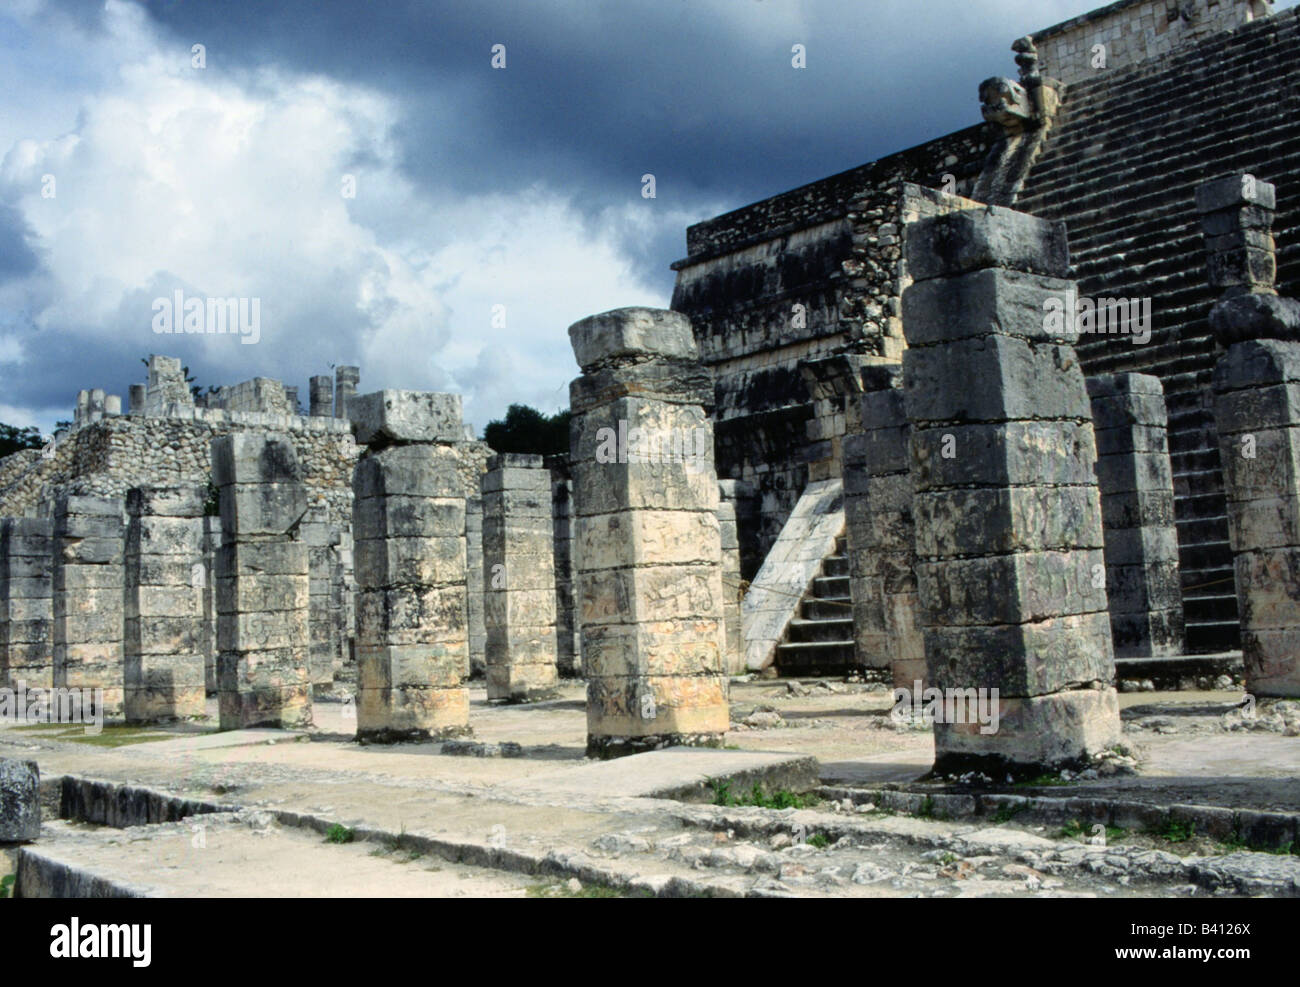 geography / travel, Mexico, Chichen Itza, Maya town, founded in 5th century AD, extended in Puuc style 7th - 10th century AD, populated by Toltecs, temple of the thousand columns, architecture, America, Mayas, religion, UNESCO, World Heritage Site, Yucatan, America, central America, latin-american indians, historical, historic, ancient, fifth, seventh, tenth, latin american,  CEAM, 20th century, Stock Photo